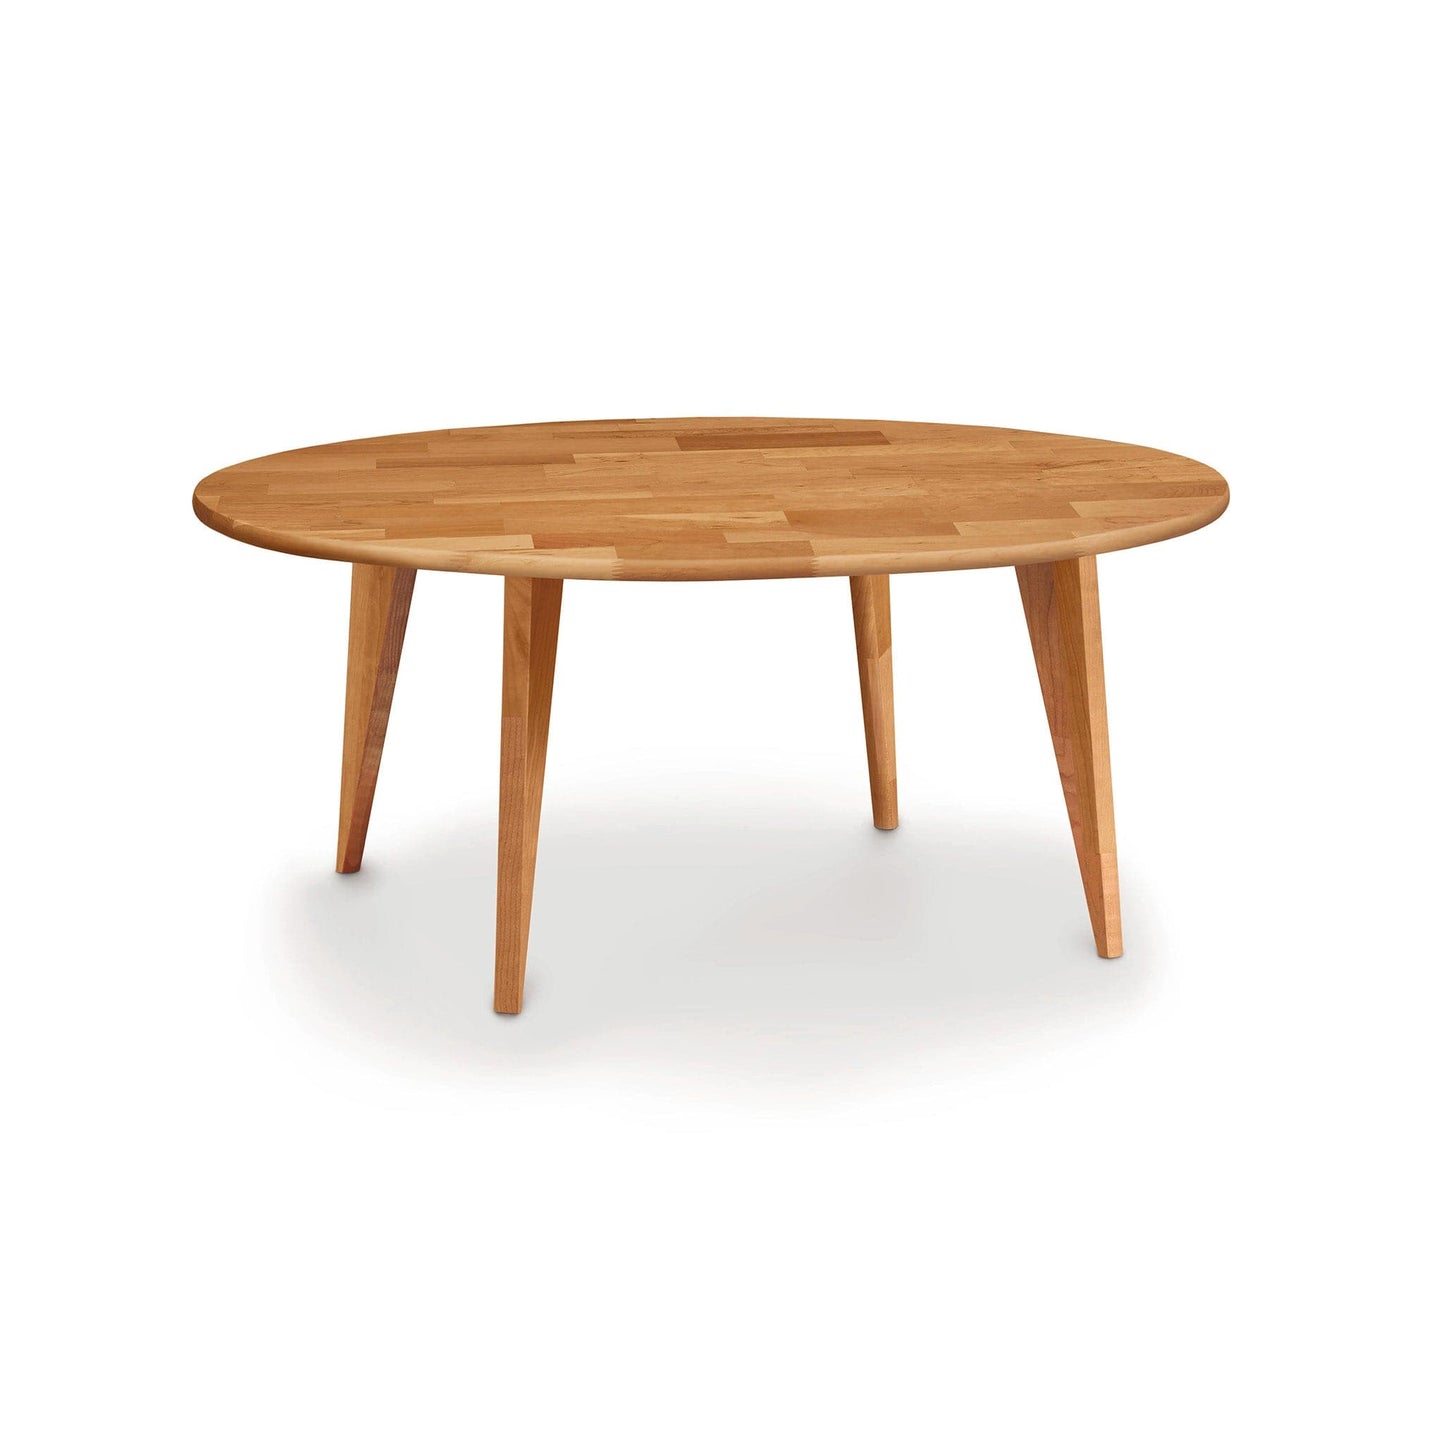 Copeland Essentials Collection Round Coffee Table